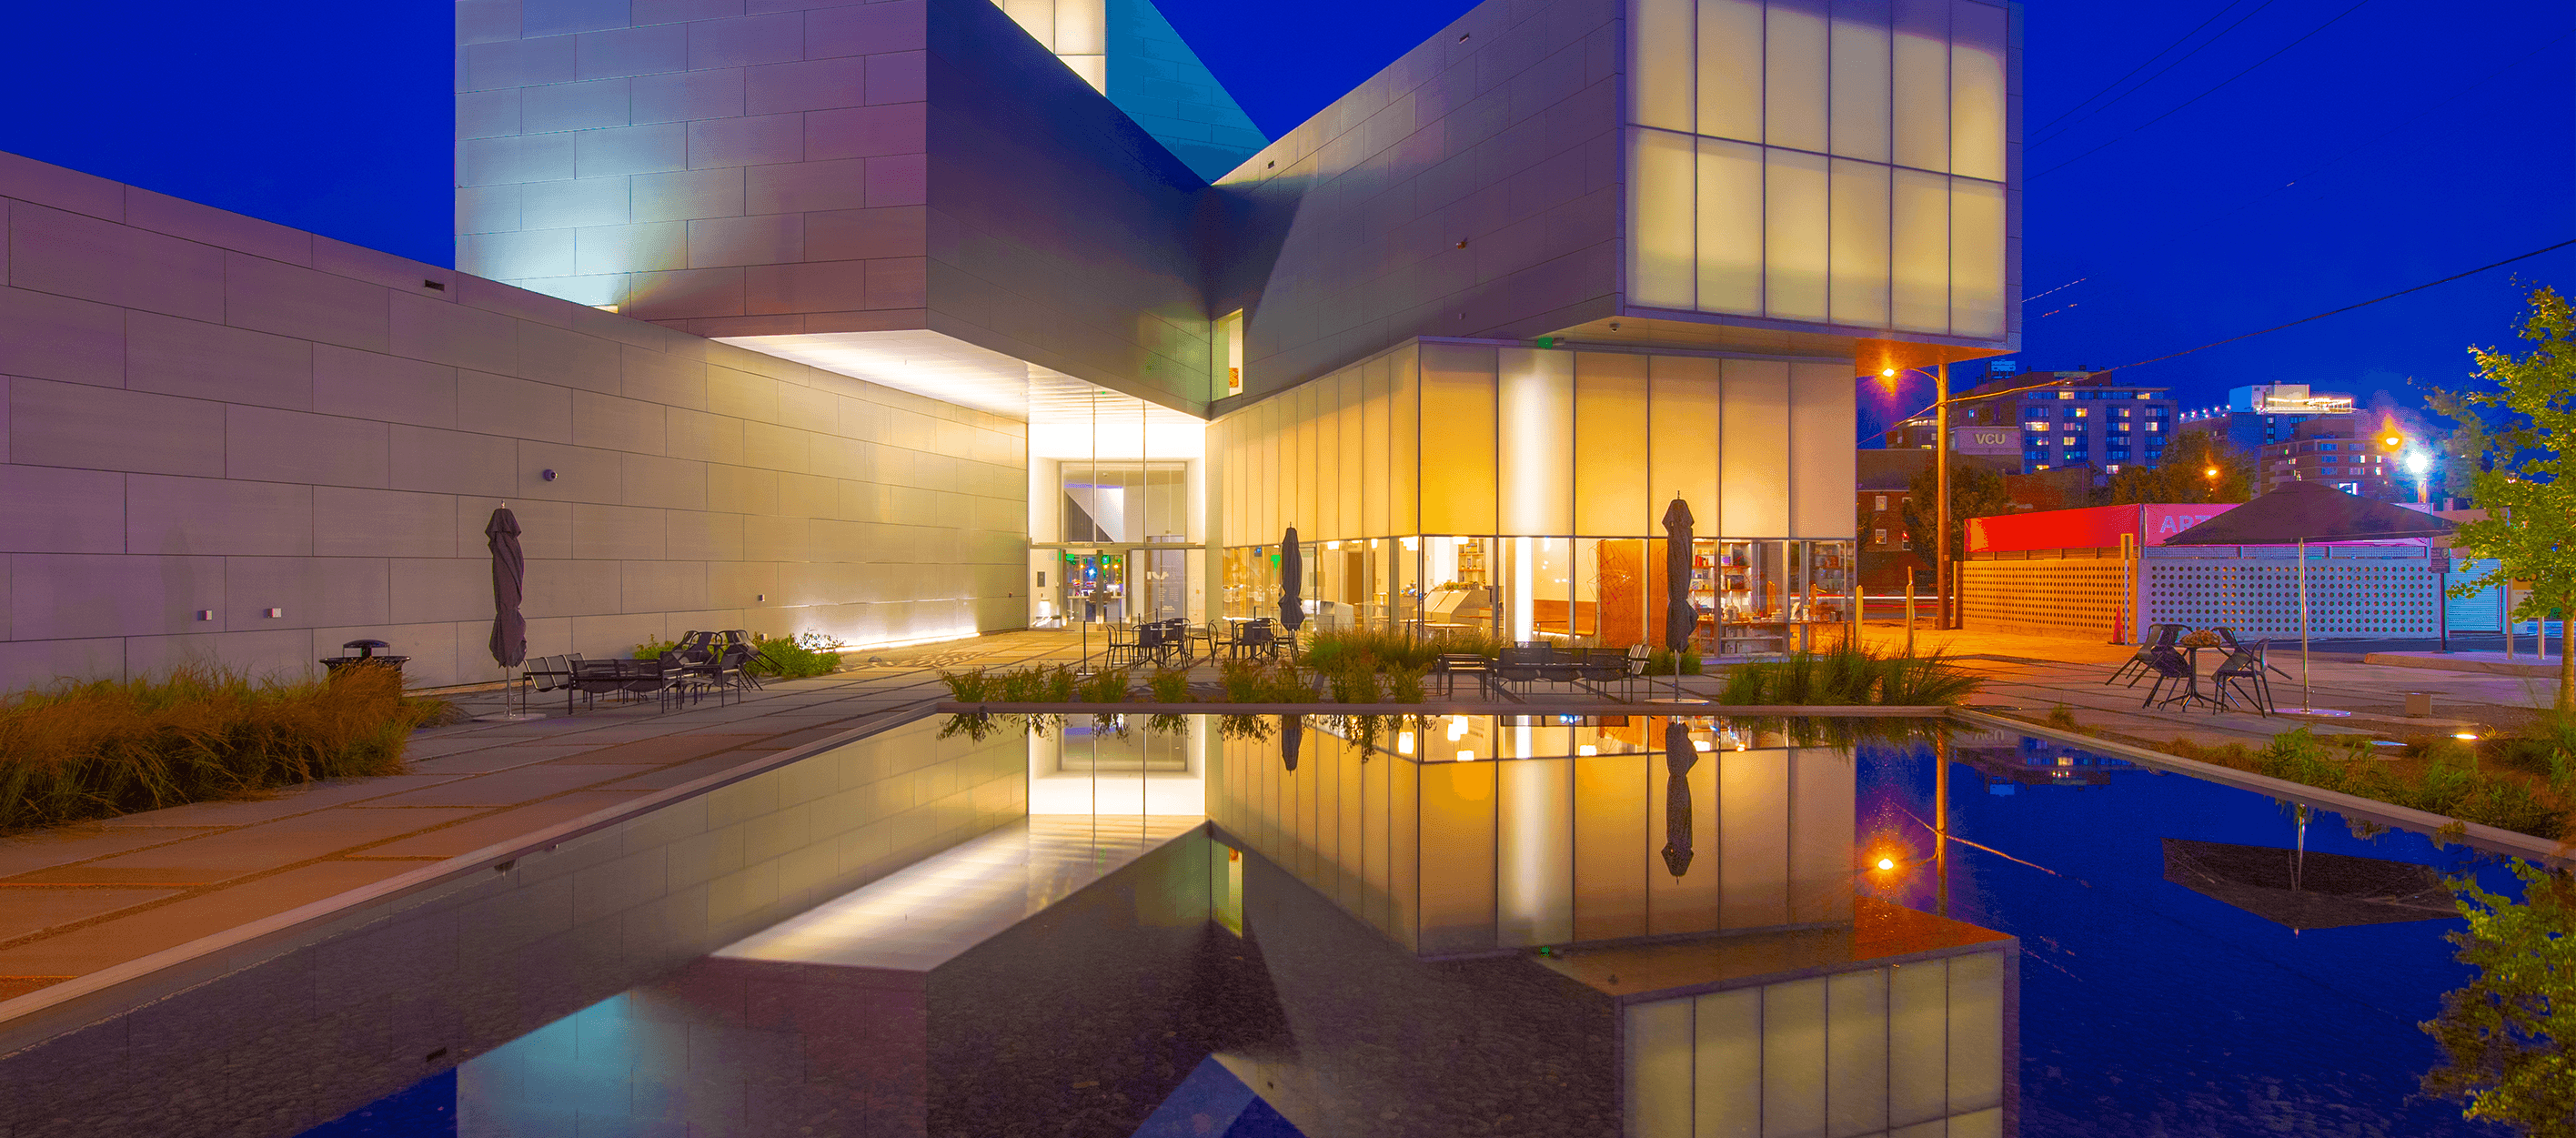 Institute for Contemporary Art at night